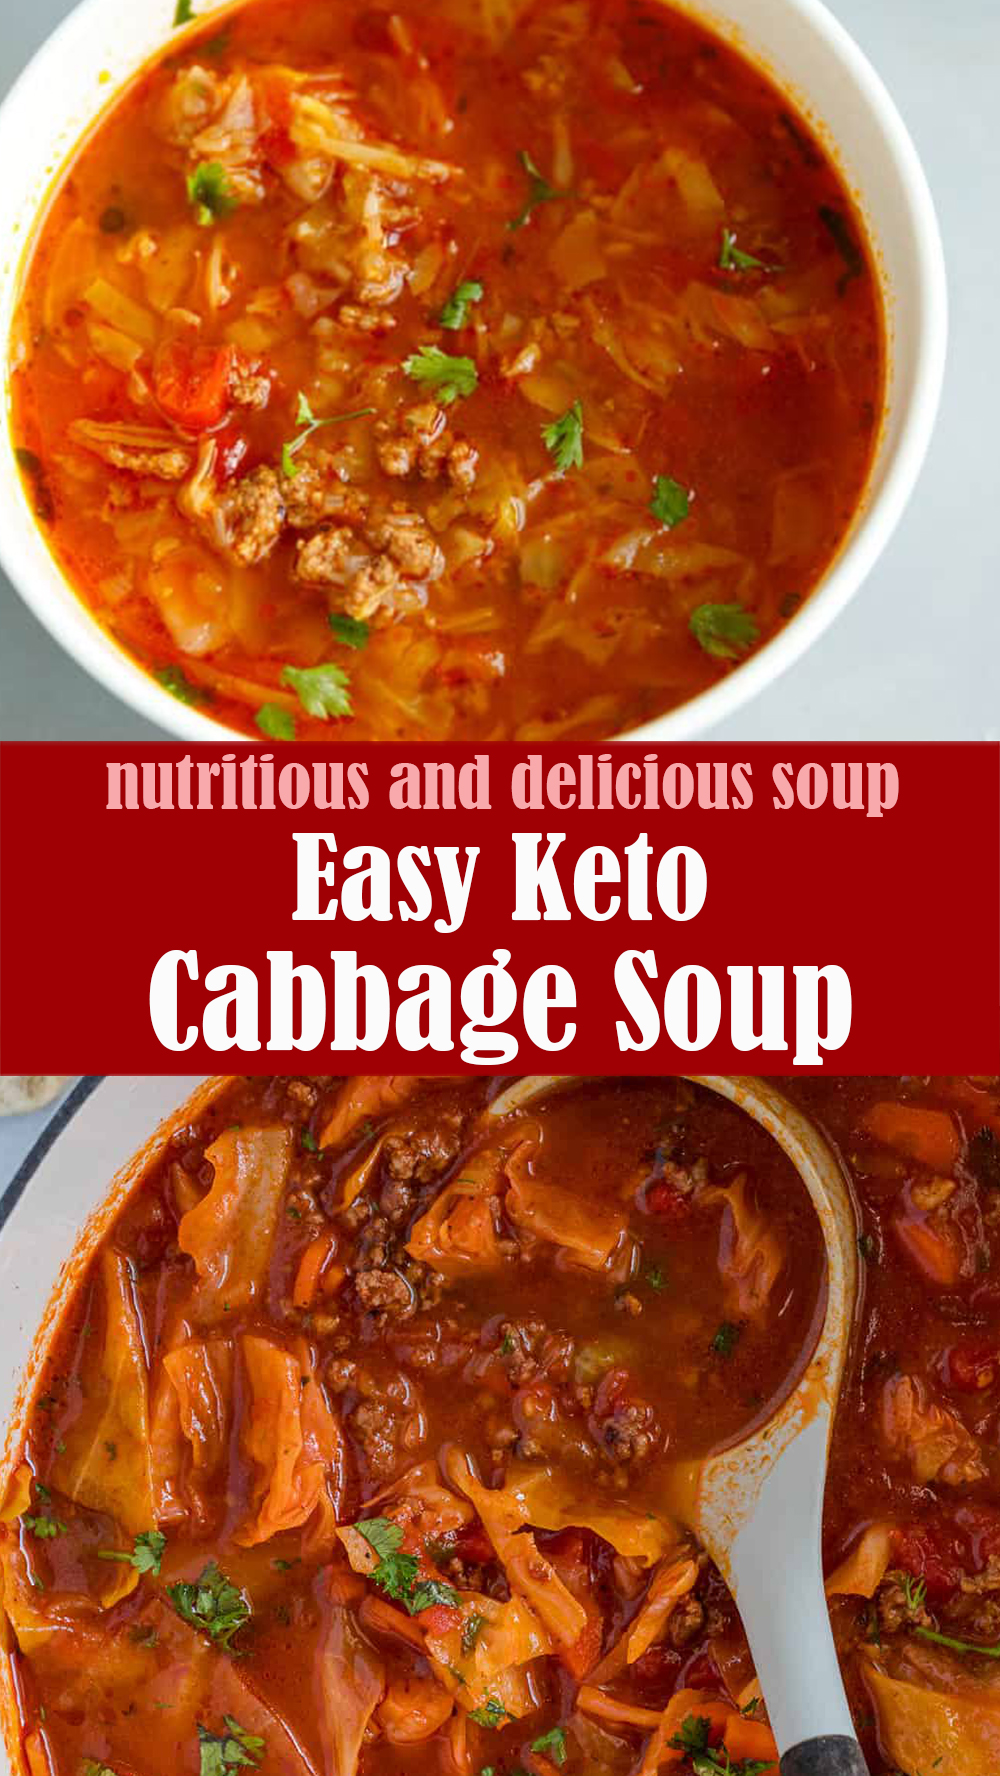 Easy Keto Cabbage Soup